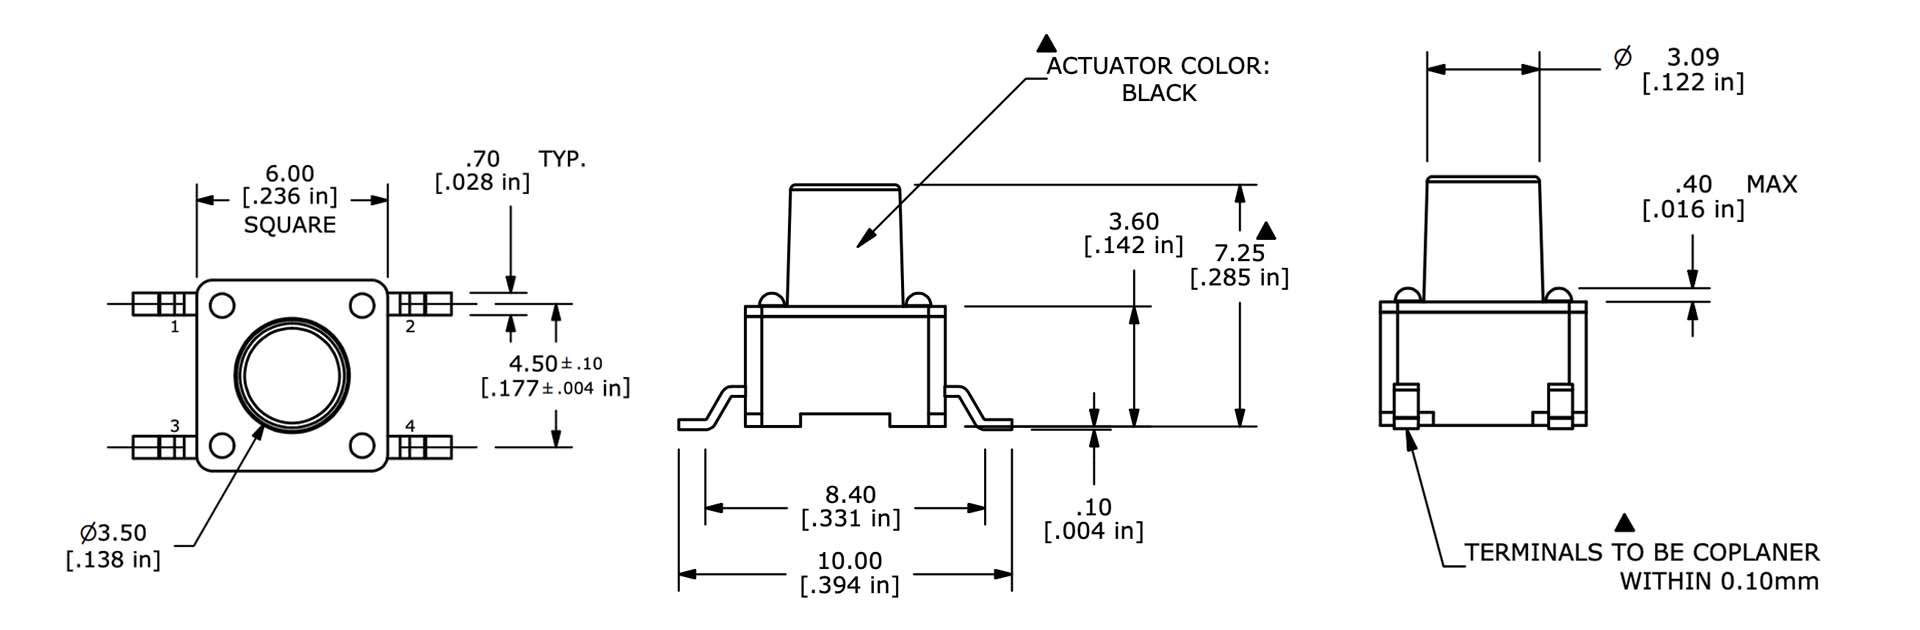 Datasheet drawing of TL3301 Tact Switch